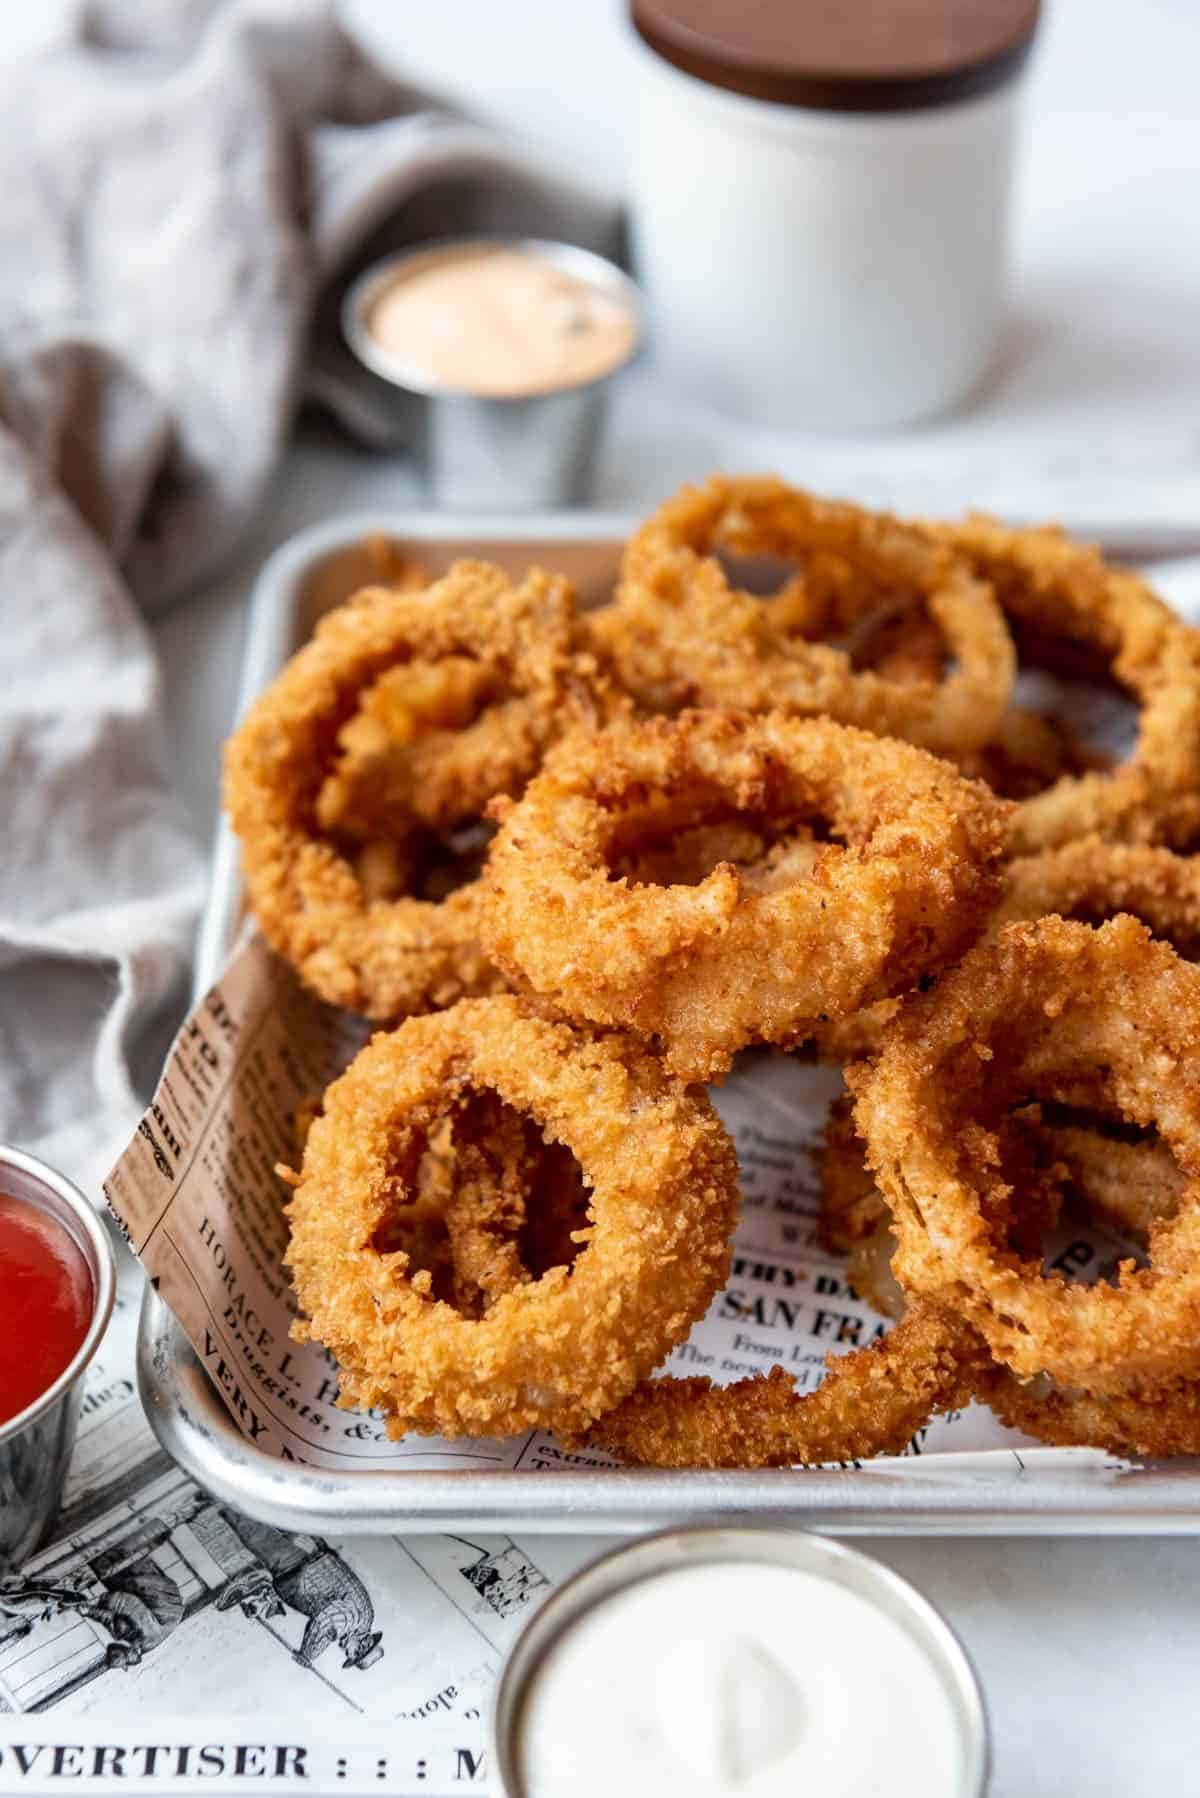 Bunch of onion rings on a baking pan with paper lining and a dipping sauce on side.